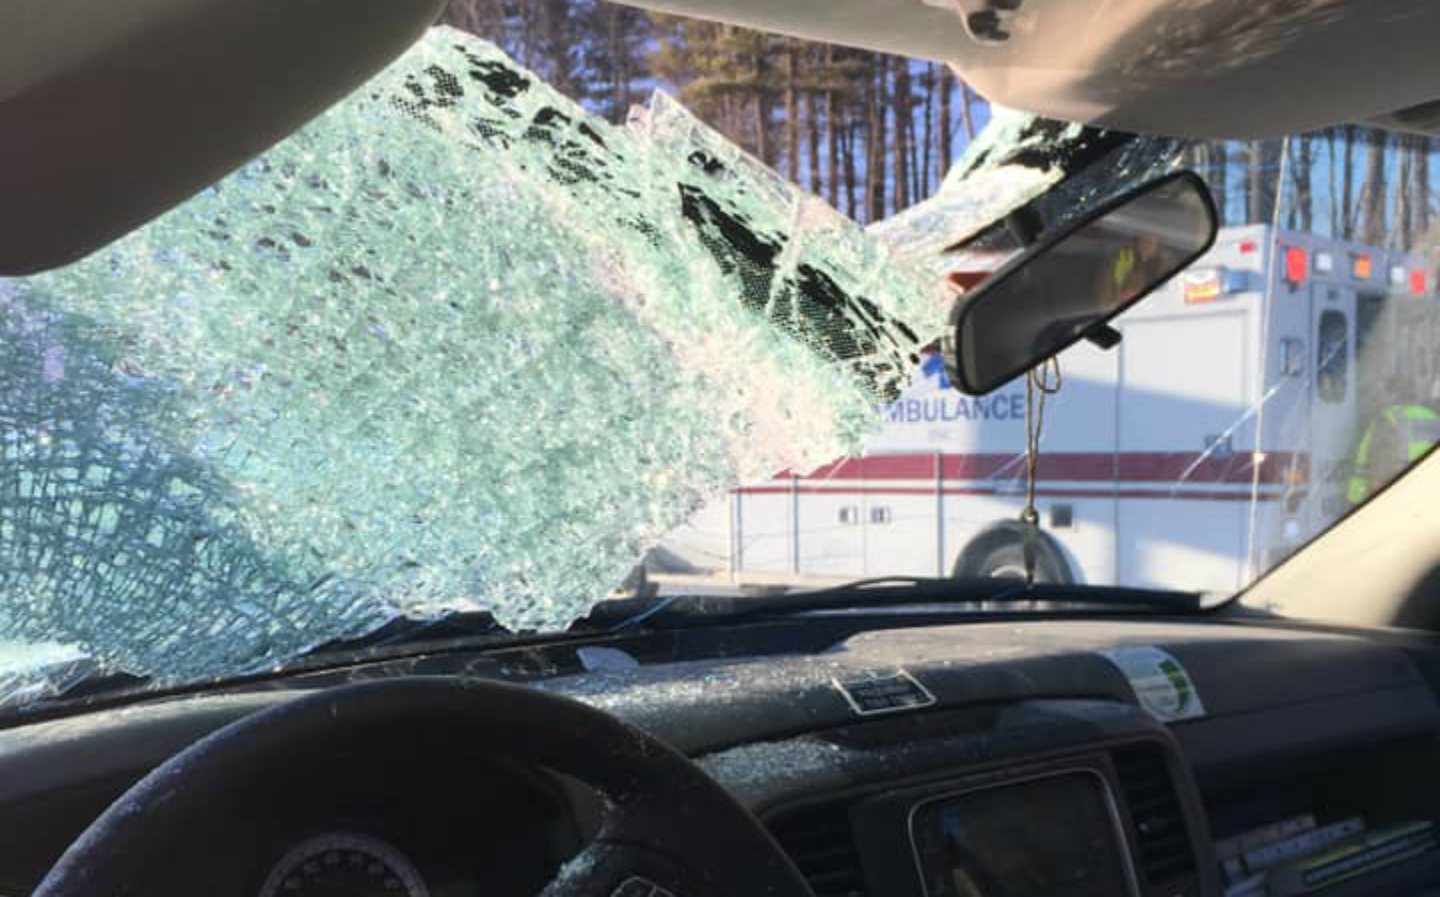 Pick-up truck driver hospitalised after ice smashes through windscreen